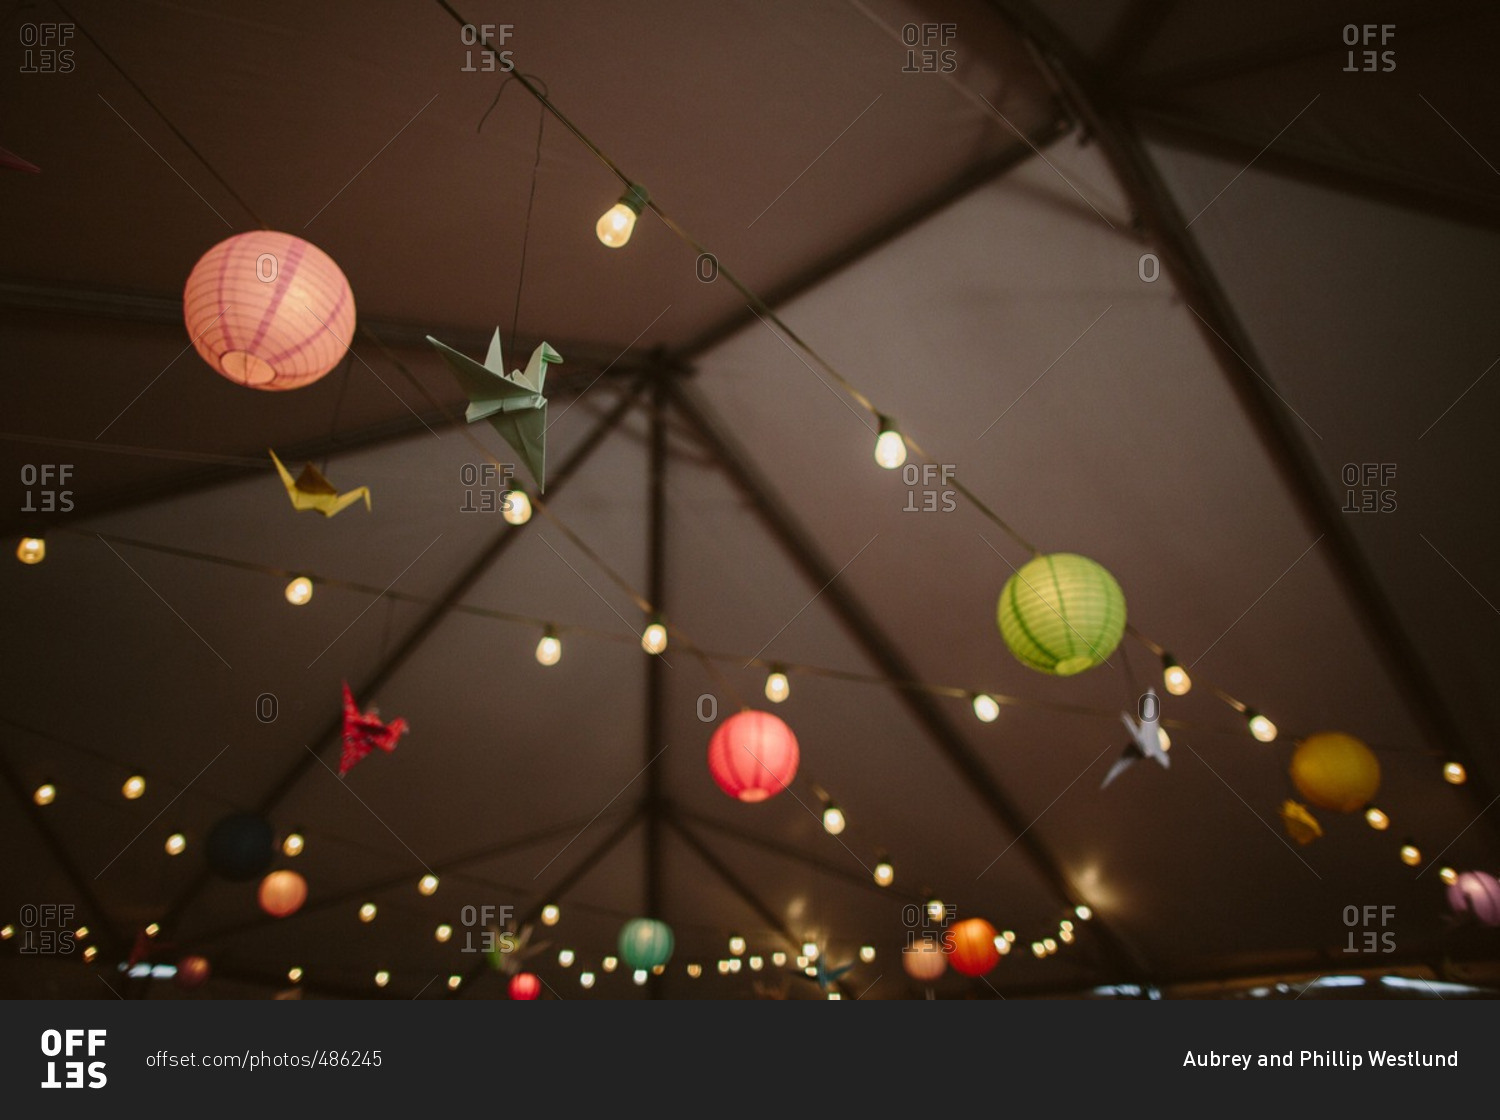 Origami birds and paper lanterns hanging from strung lights outside at night